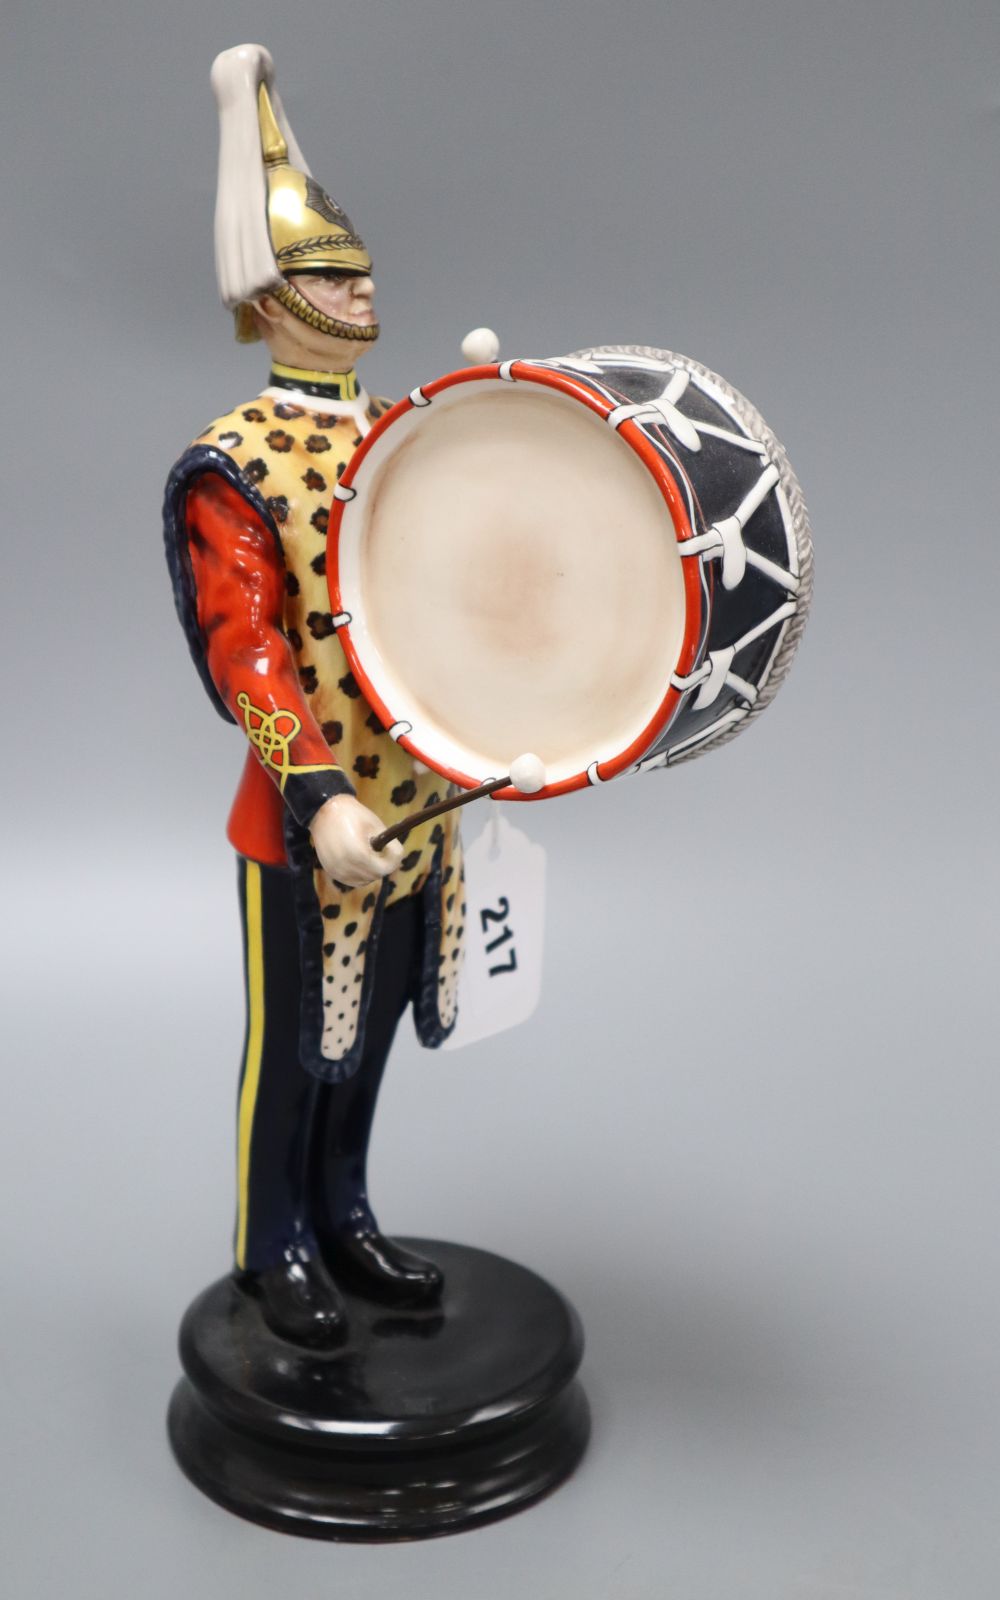 A Michael Sutty limited edition figure, 1st Kings Dragoon Guards, No. 51, height 31cm